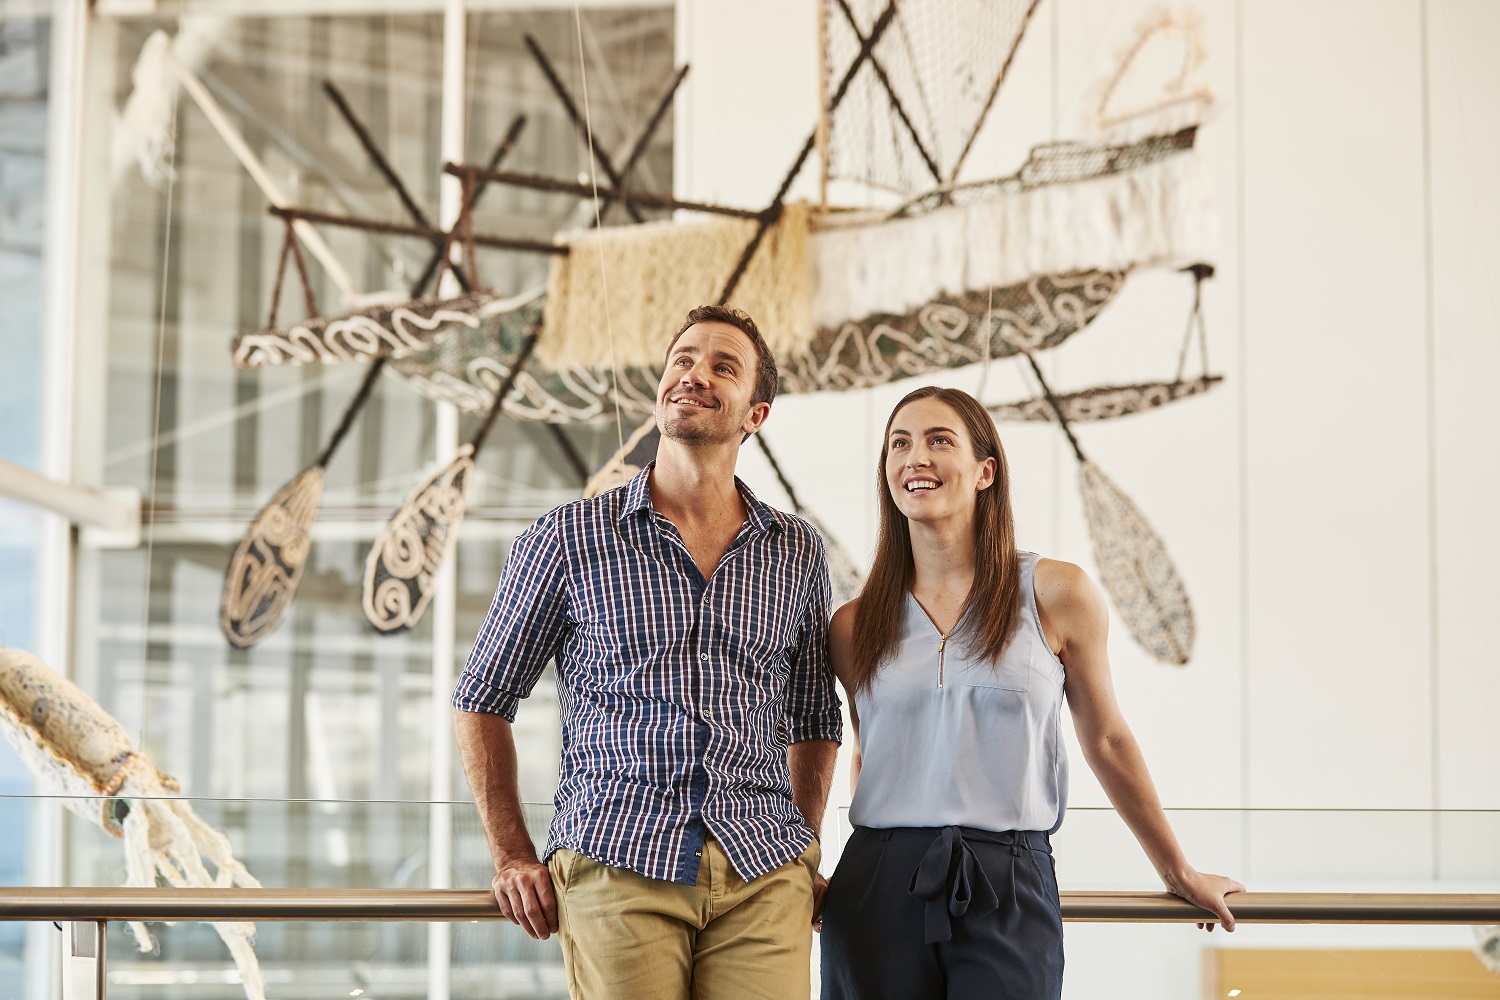 Immerse yourself in the fascinating maritime collections, exhibits and activities at Australian National Maritime Museum - A Sydney MUST-DO! 